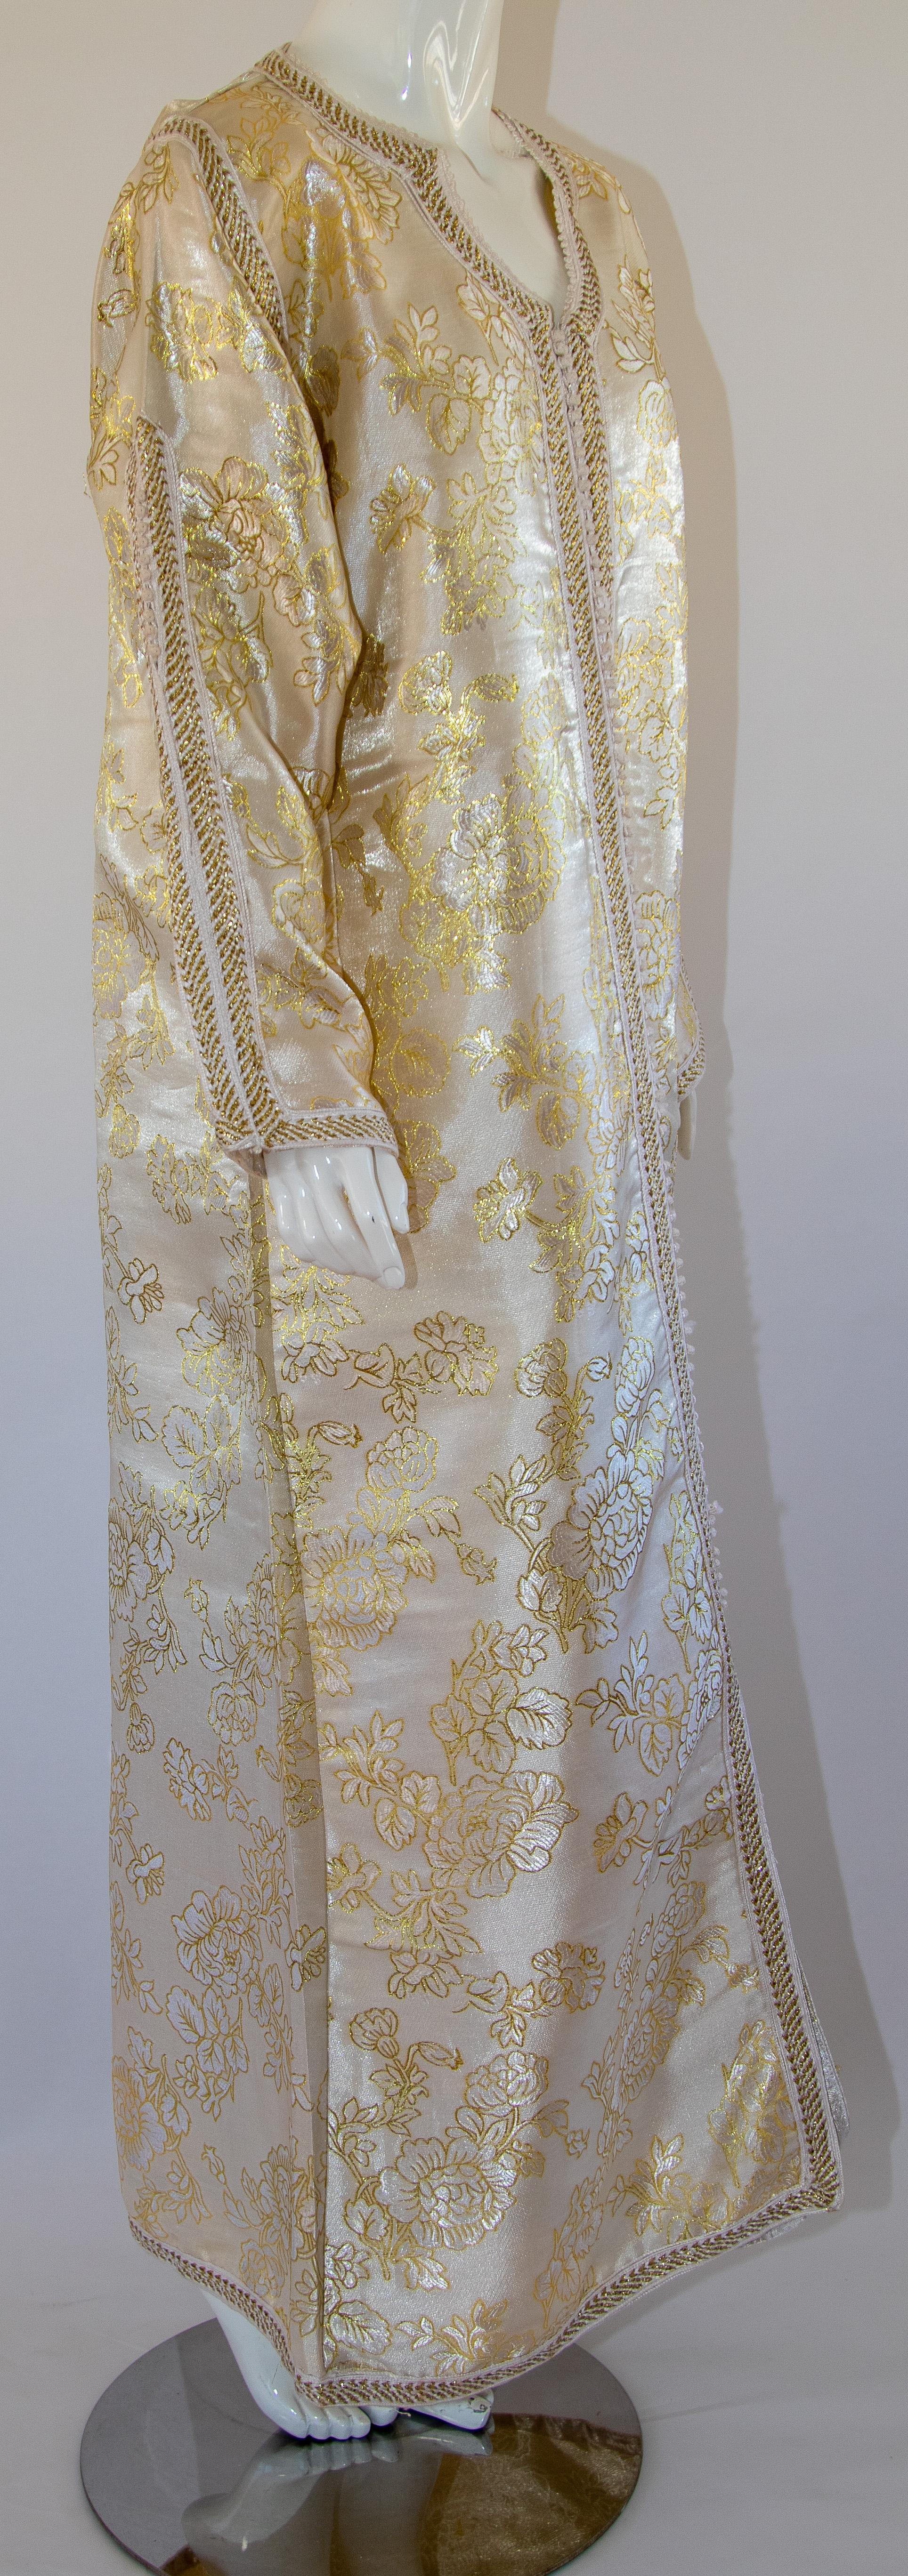 Vintage Moroccan Caftan in Gold Brocade Maxi Dress Kaftan Size L to XL For Sale 11